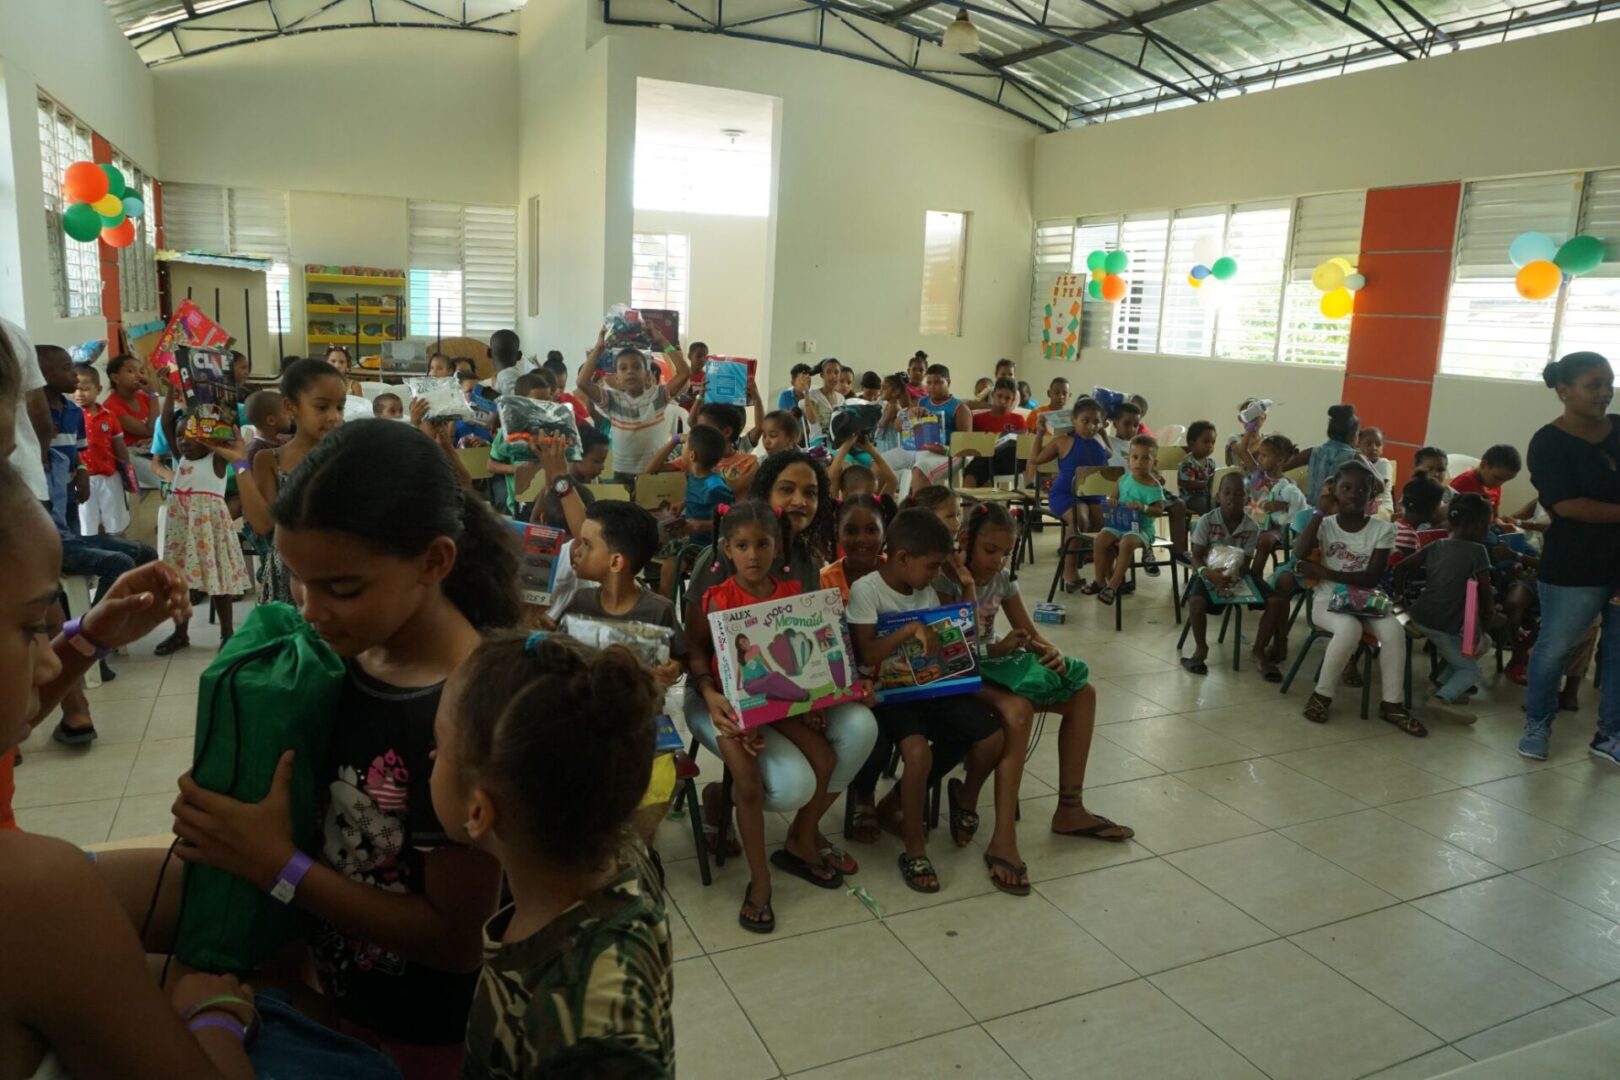 A classroom full of children sitting on the chairs and holding their toys